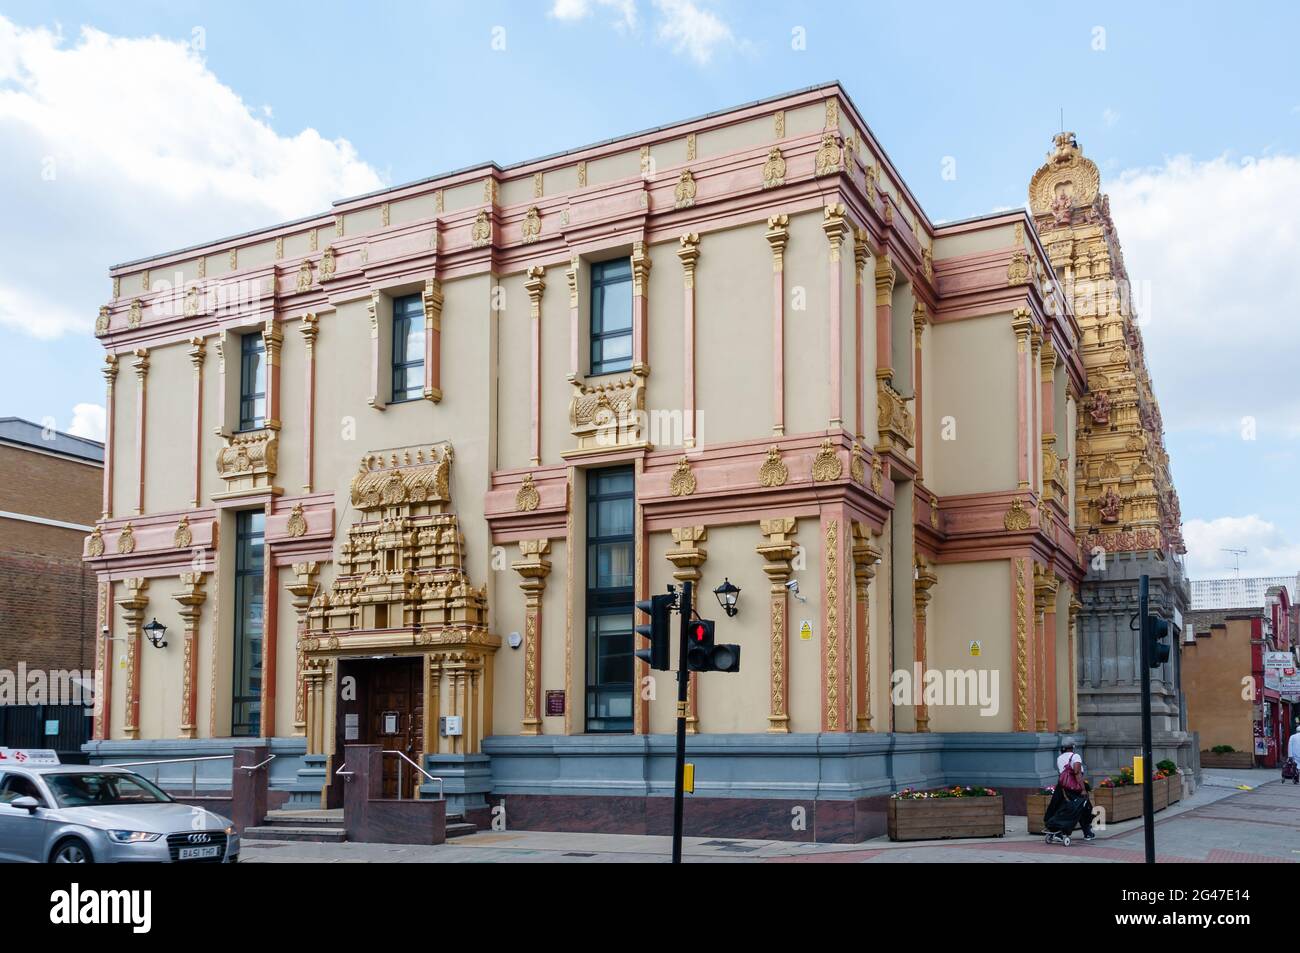 Sri Mahalakshmi HinduTemple, was built in 1989 and was consecrated on 2nd February 1990, Newham, London Stock Photo